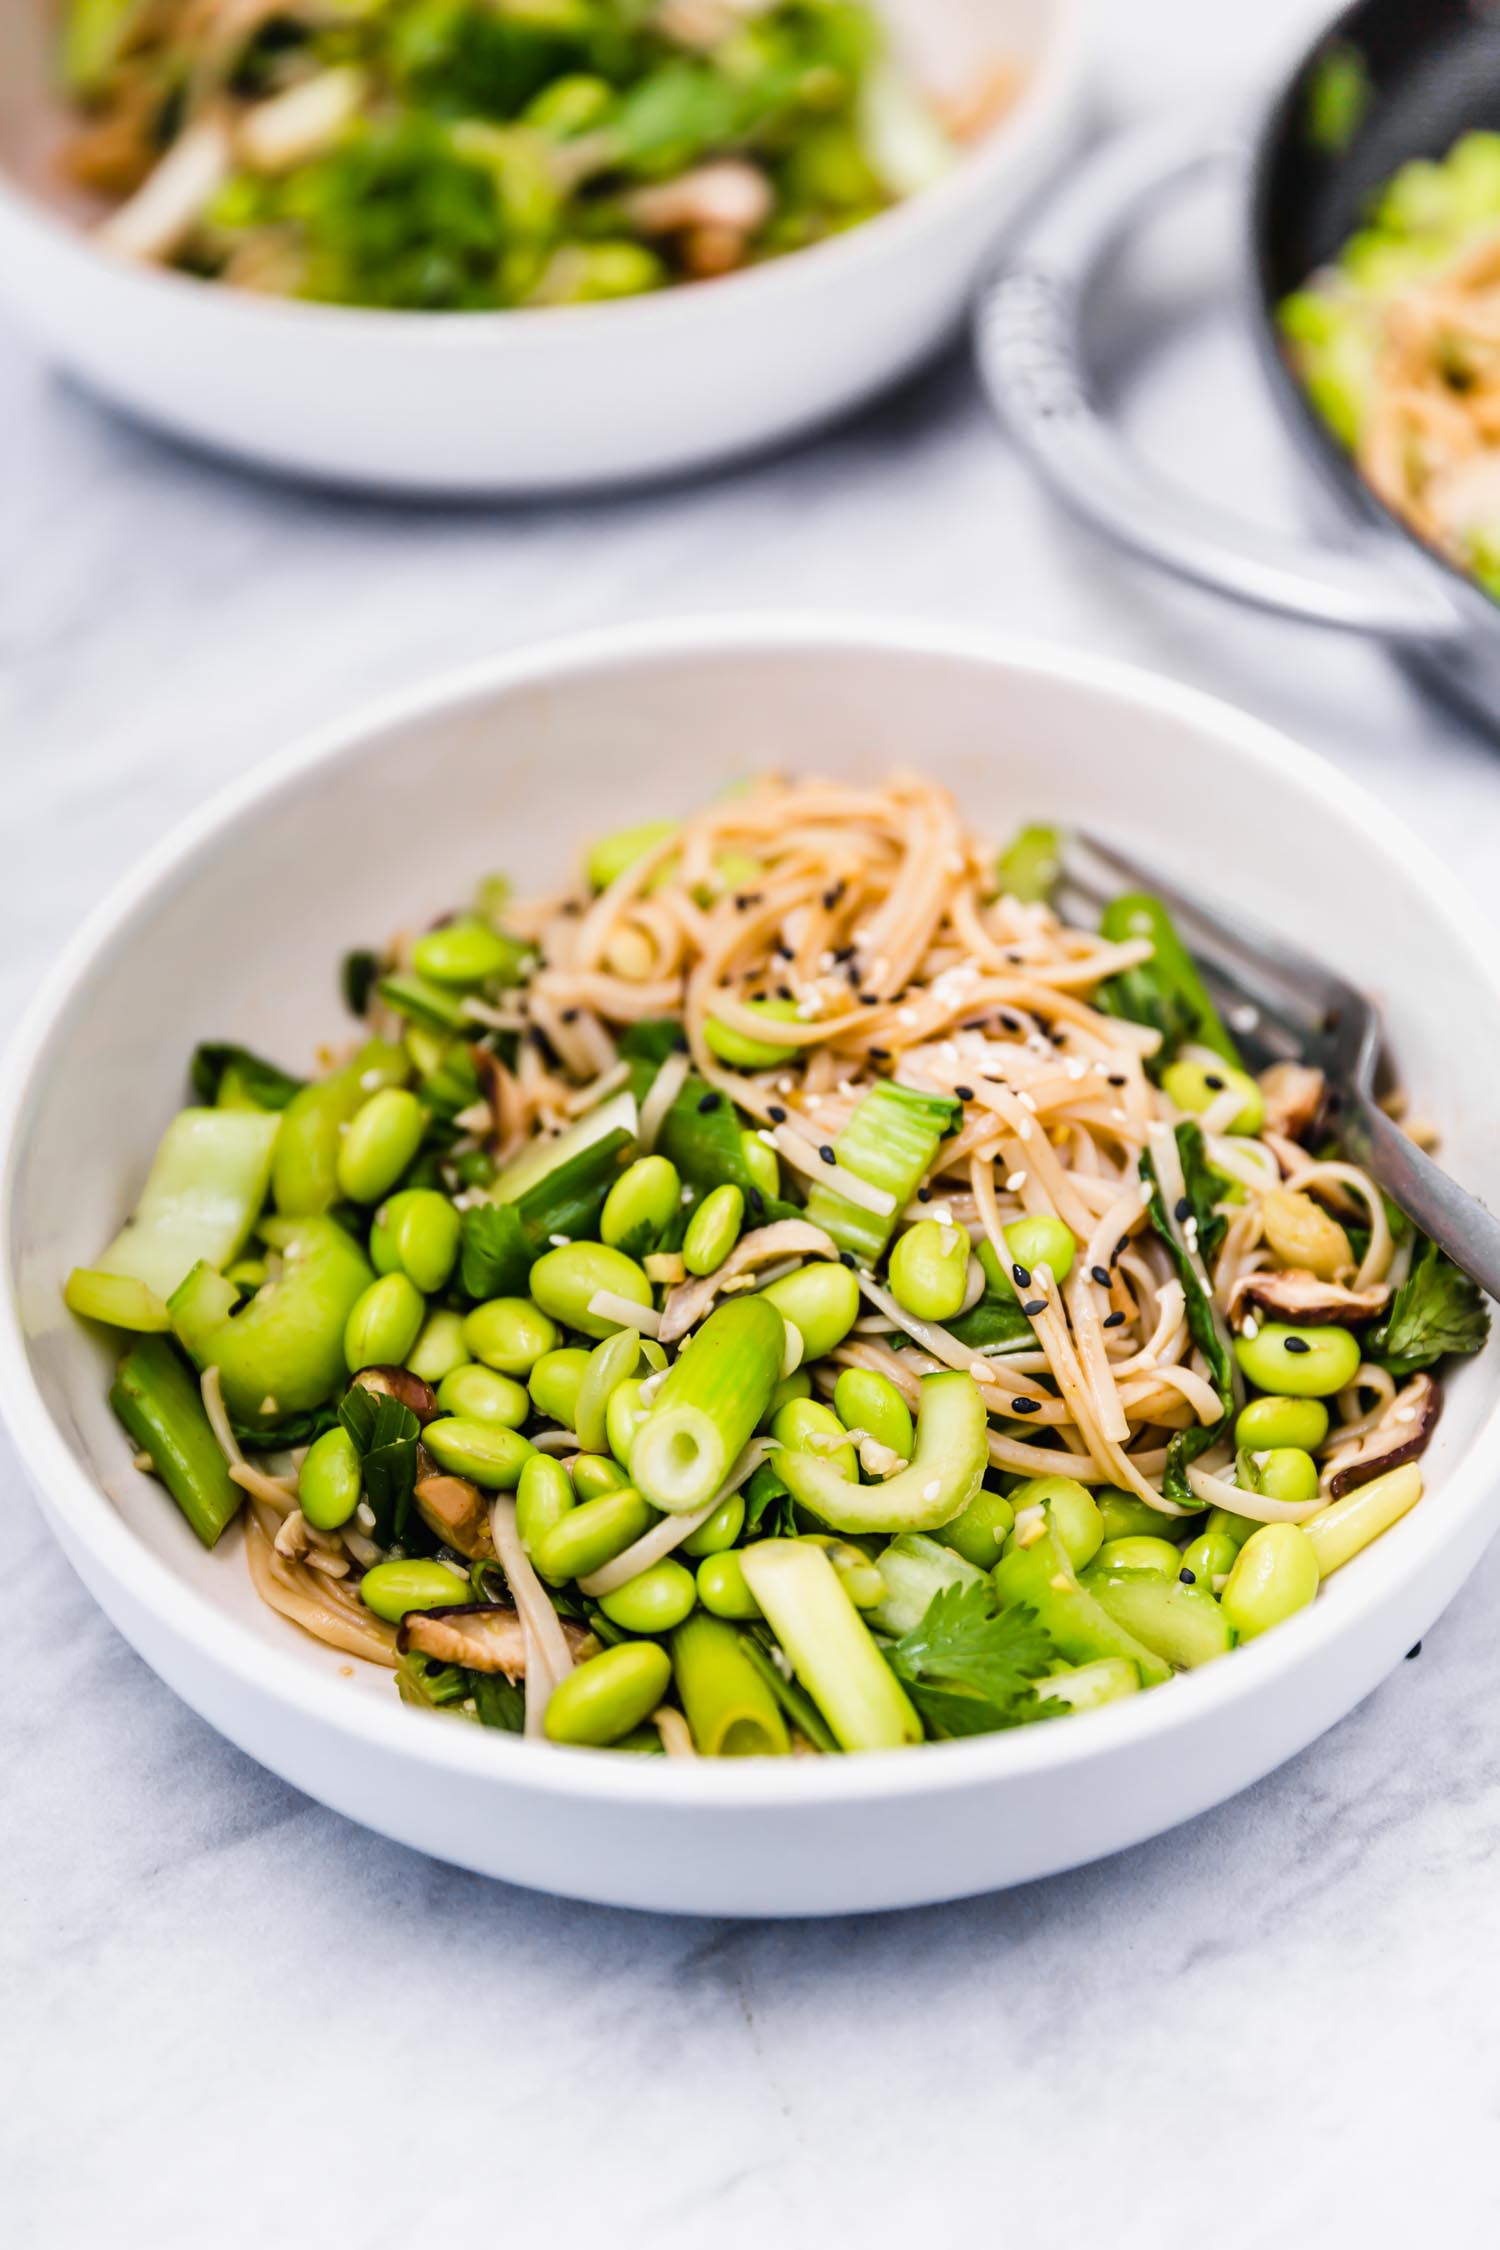 Edamame and Bok Choy Sauté with Rice Noodles and Miso Lime Sauce    is plant-based, quick (ready within 30 minutes from chopping to plating), easy, gluten-free, oil-free, nut-free, veggie-packed (with three servings of veg per person - including one cruciferous), satisfying (with a serving of beans per person), and great all year round, especially during the fall/winter seasons. #vegandinner #ricenoodles #misosauce #wfpb #dinner #plantbased #edamame #bokchoy